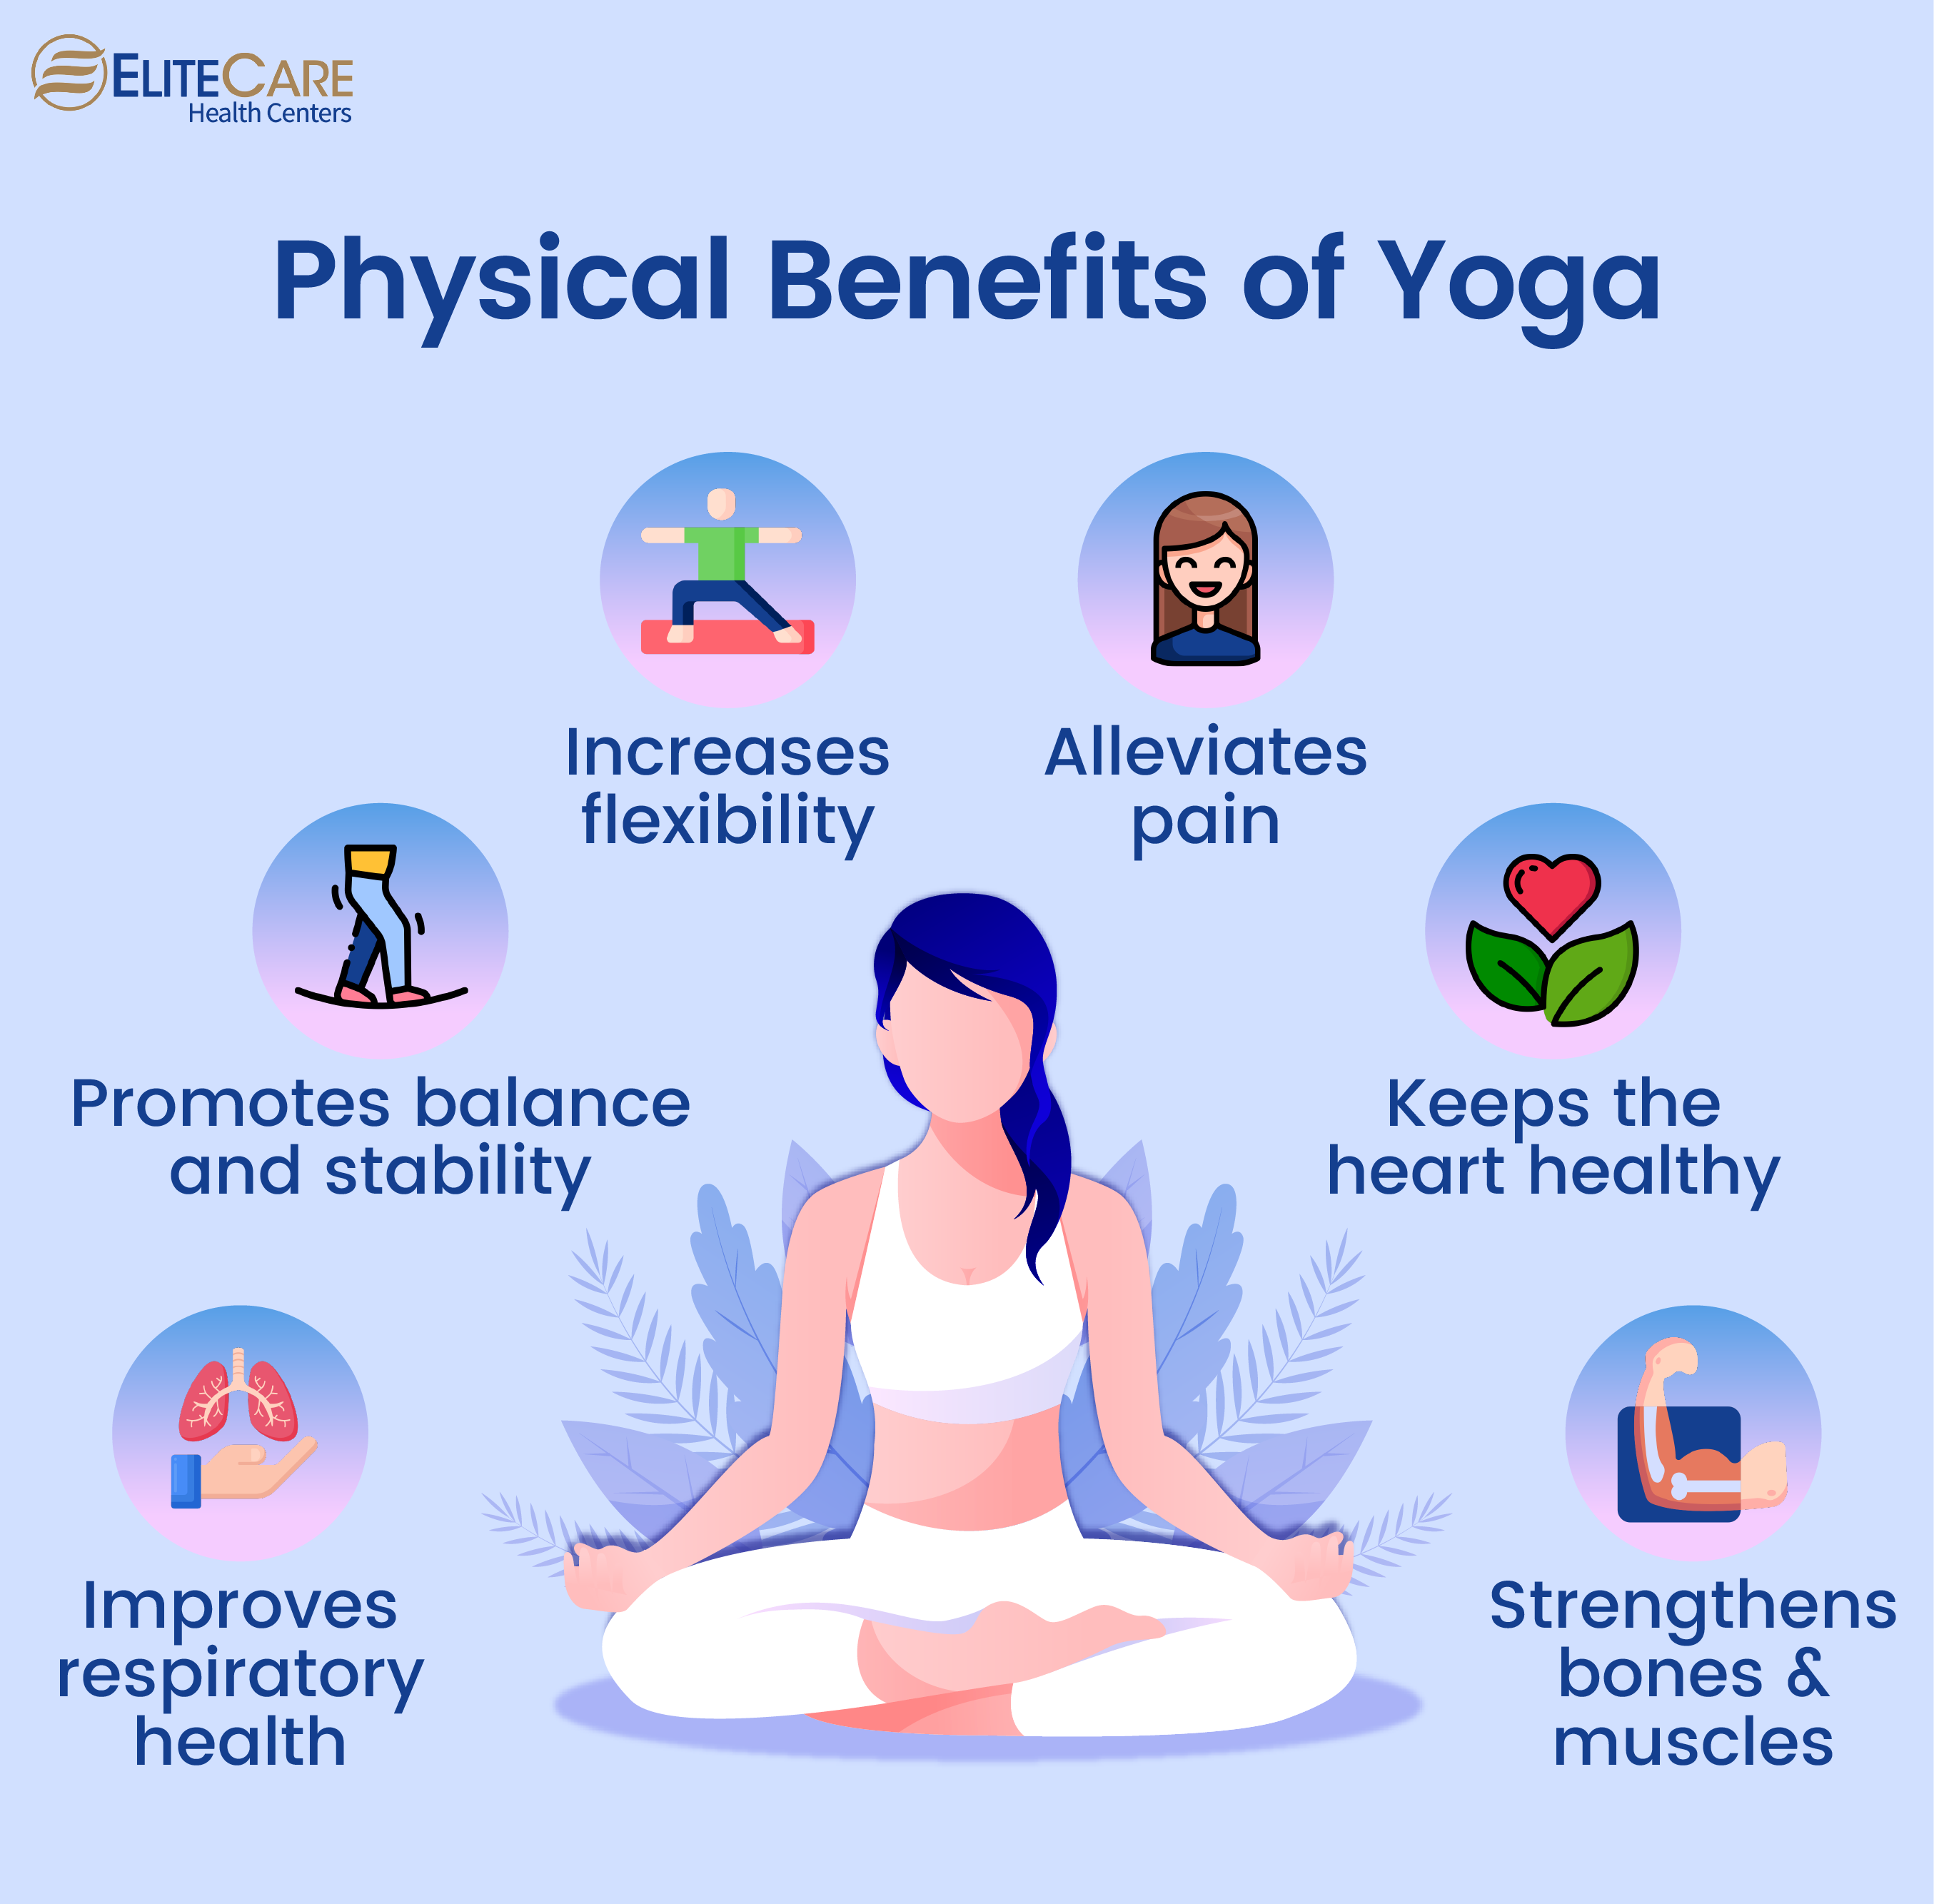 Physical Benefits of Yoga